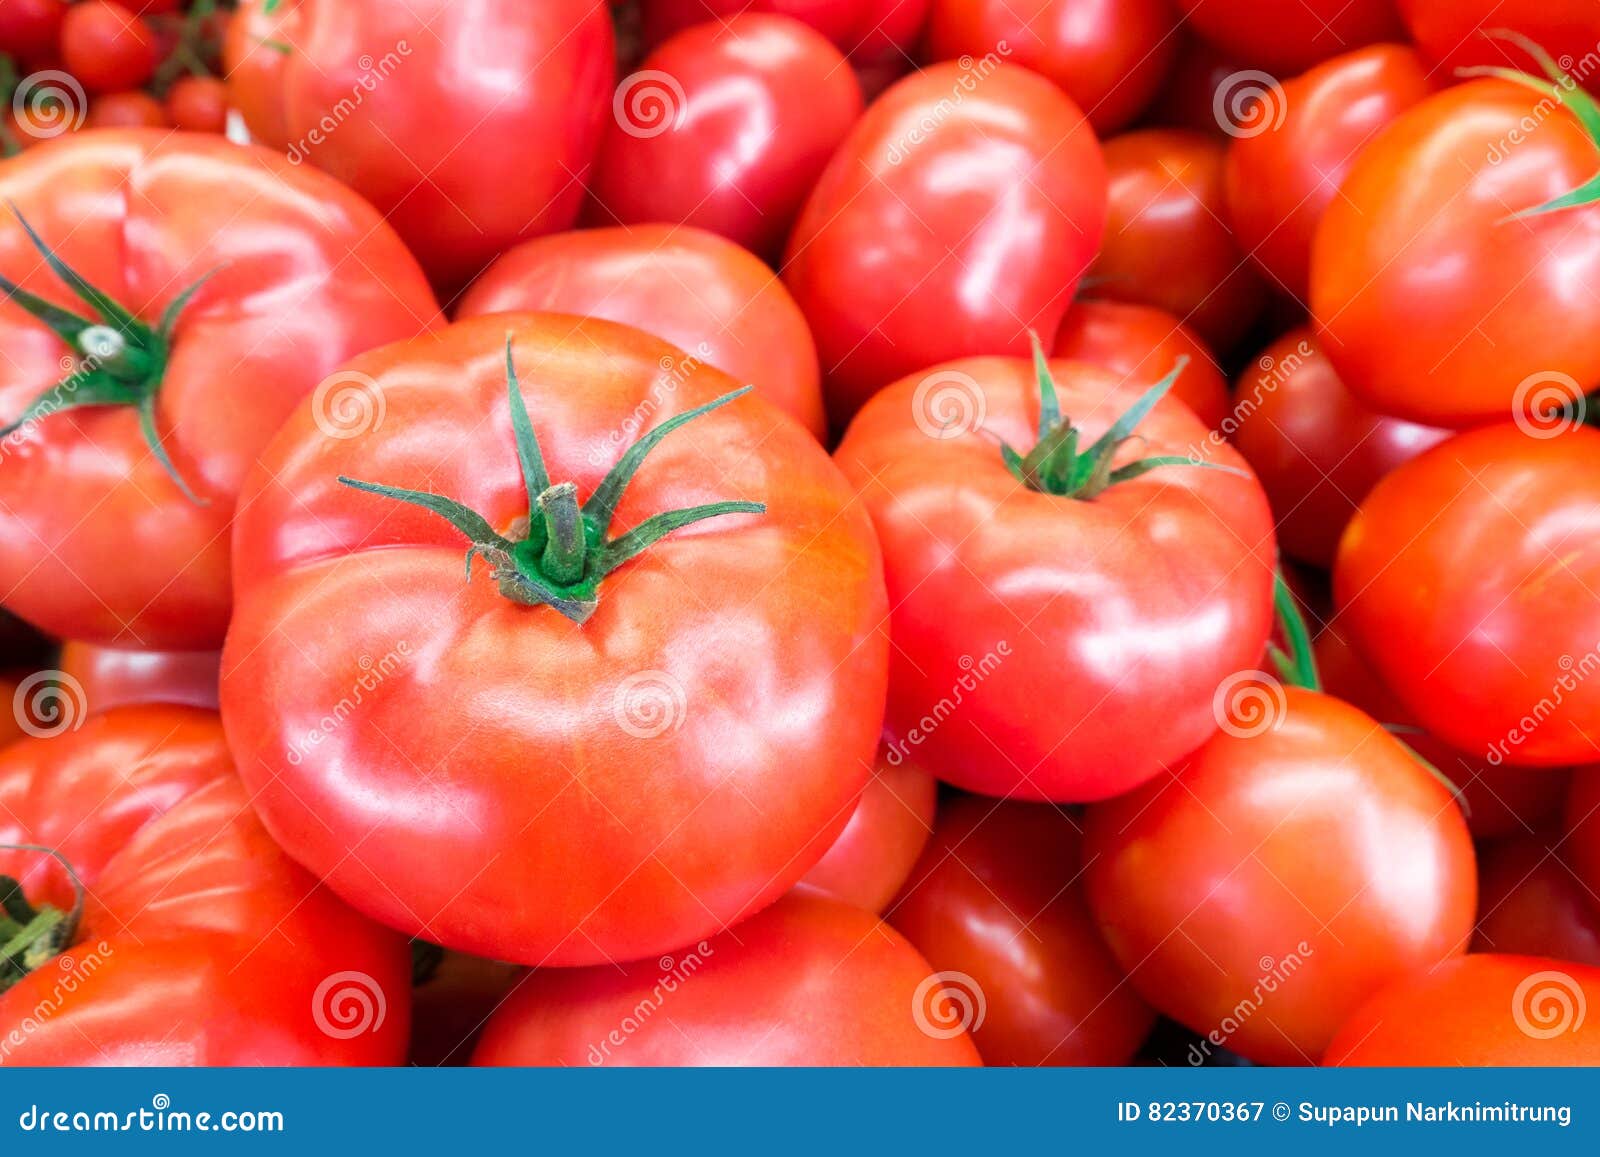 close up of fresh, juicy, ripe tomatoes pile. lycopene and antioxidant in fruit nutrition good for health and skin. flat lay.